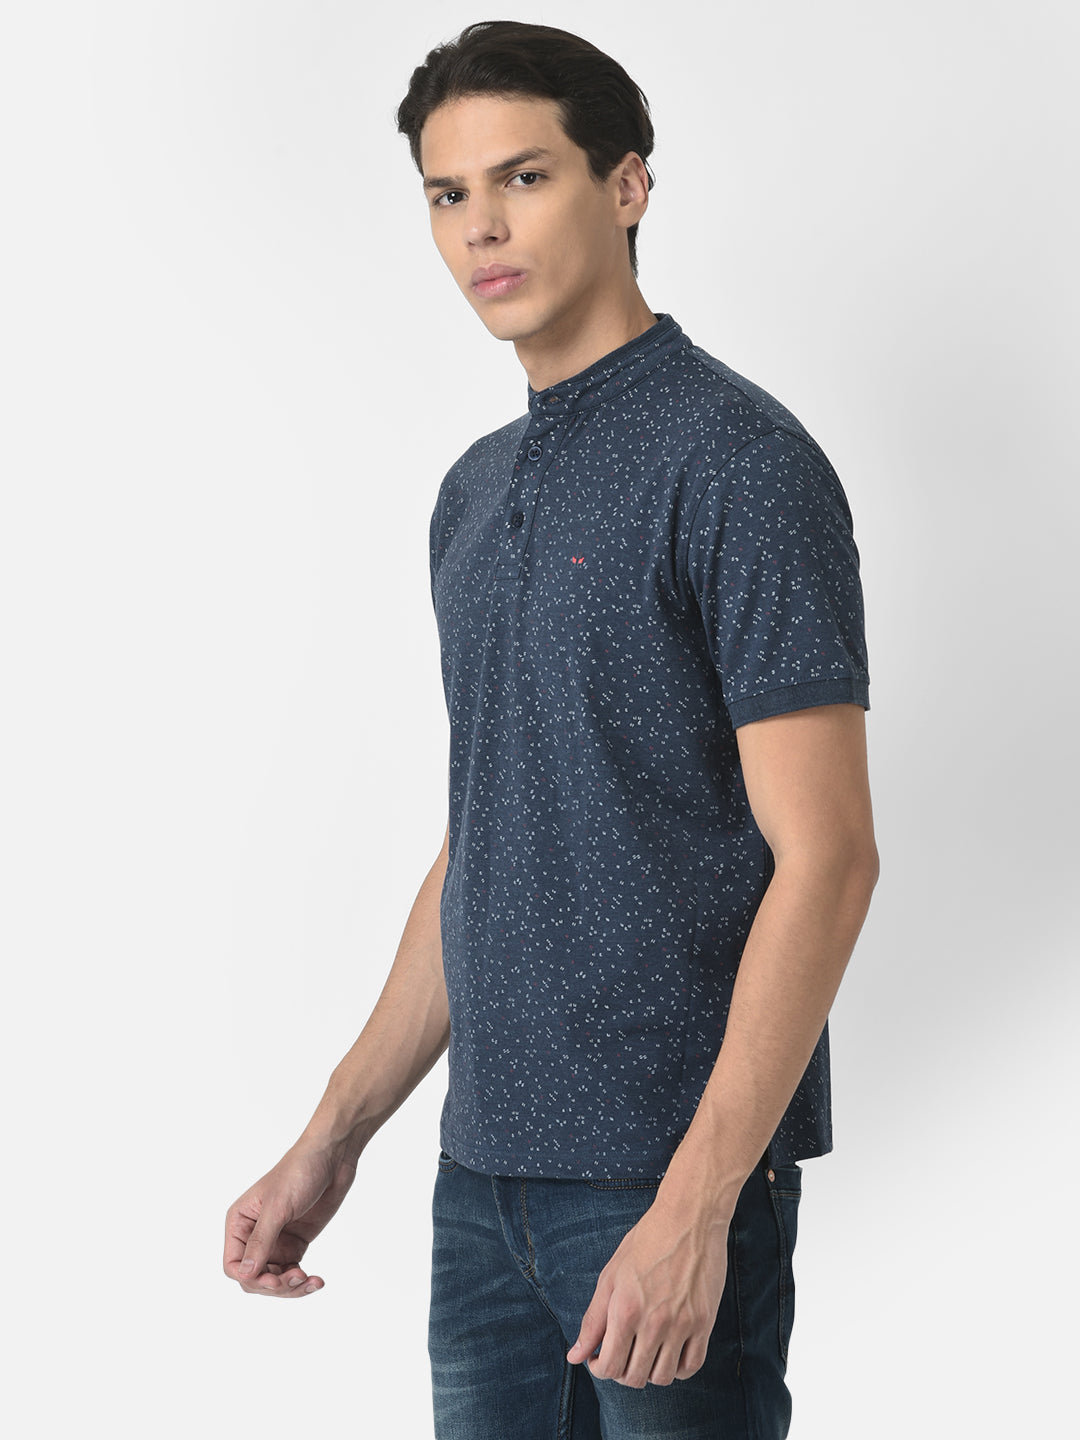 Navy Blue T-Shirt with Abstract Print 